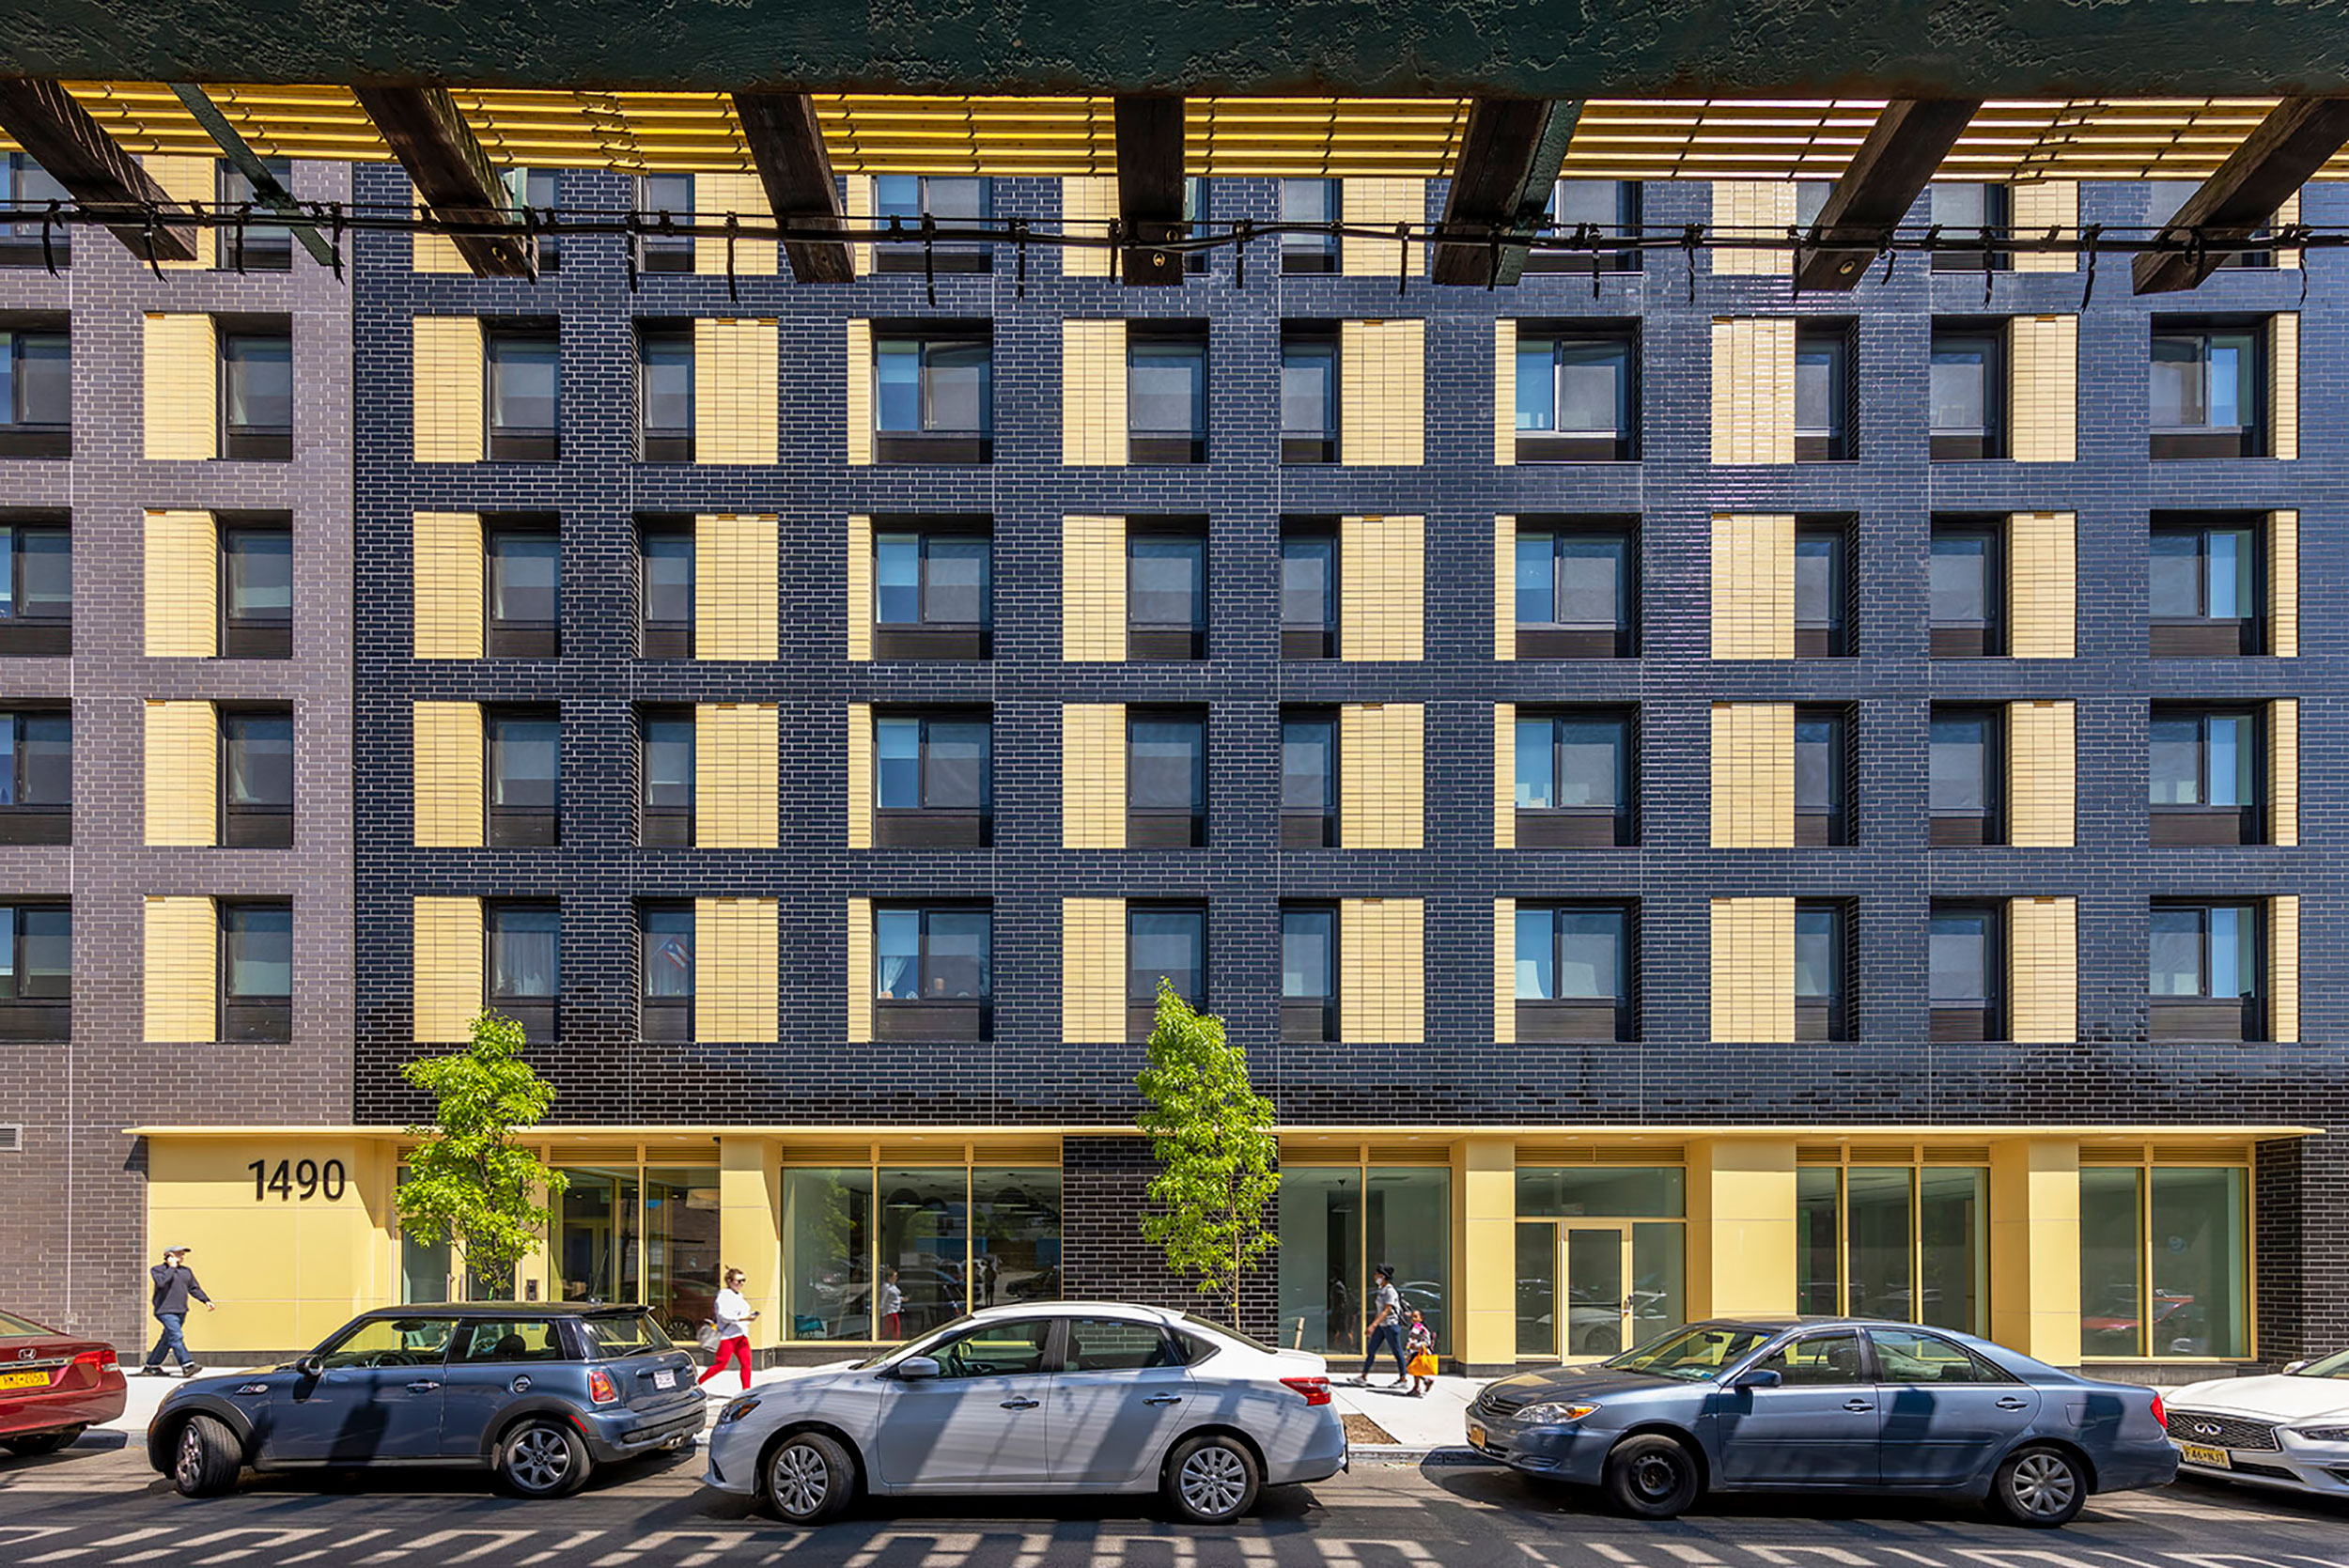 1490 Southern Boulevard in Bronx, NY, by Bernheimer Architecture